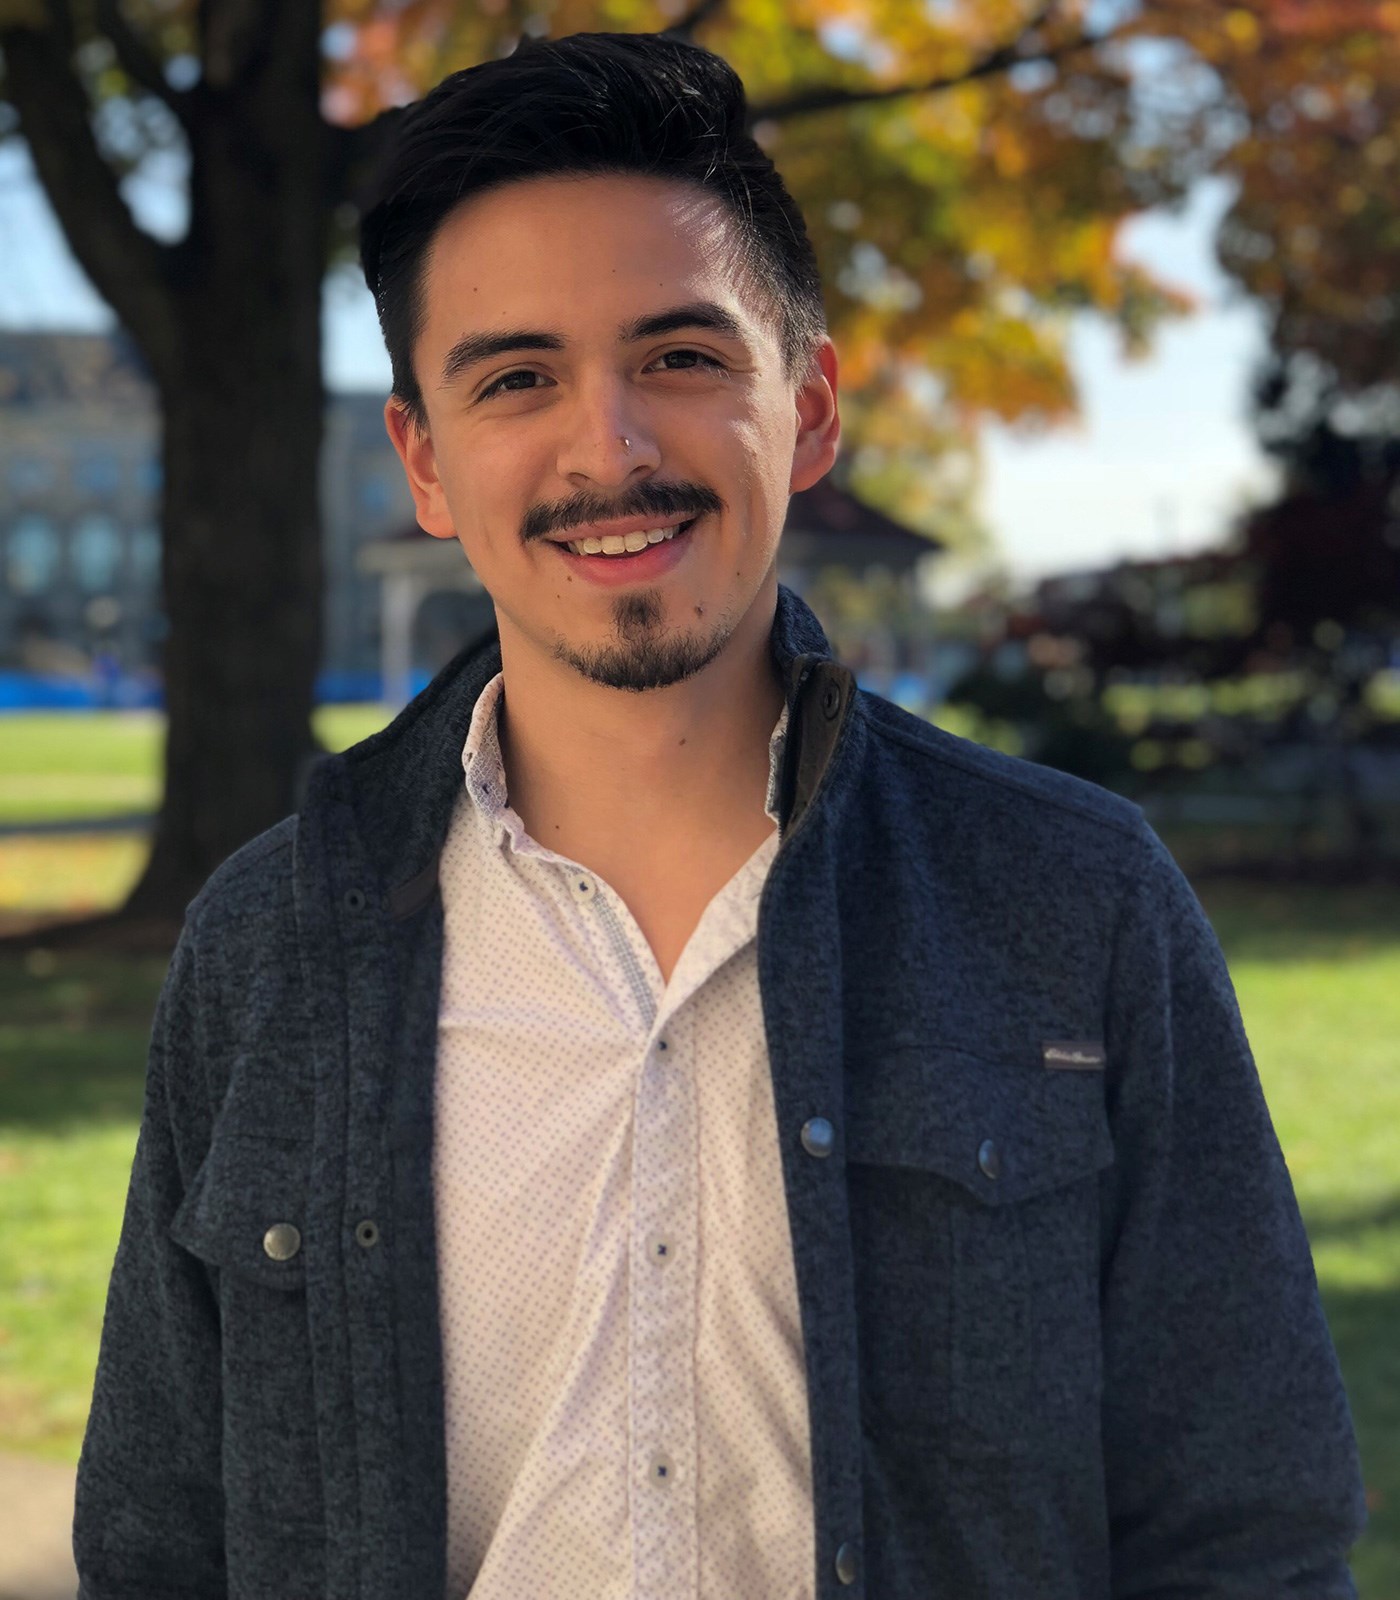 Luis Diaz is a Money Management Mentor in the UMass Lowell Financial Aid Office.